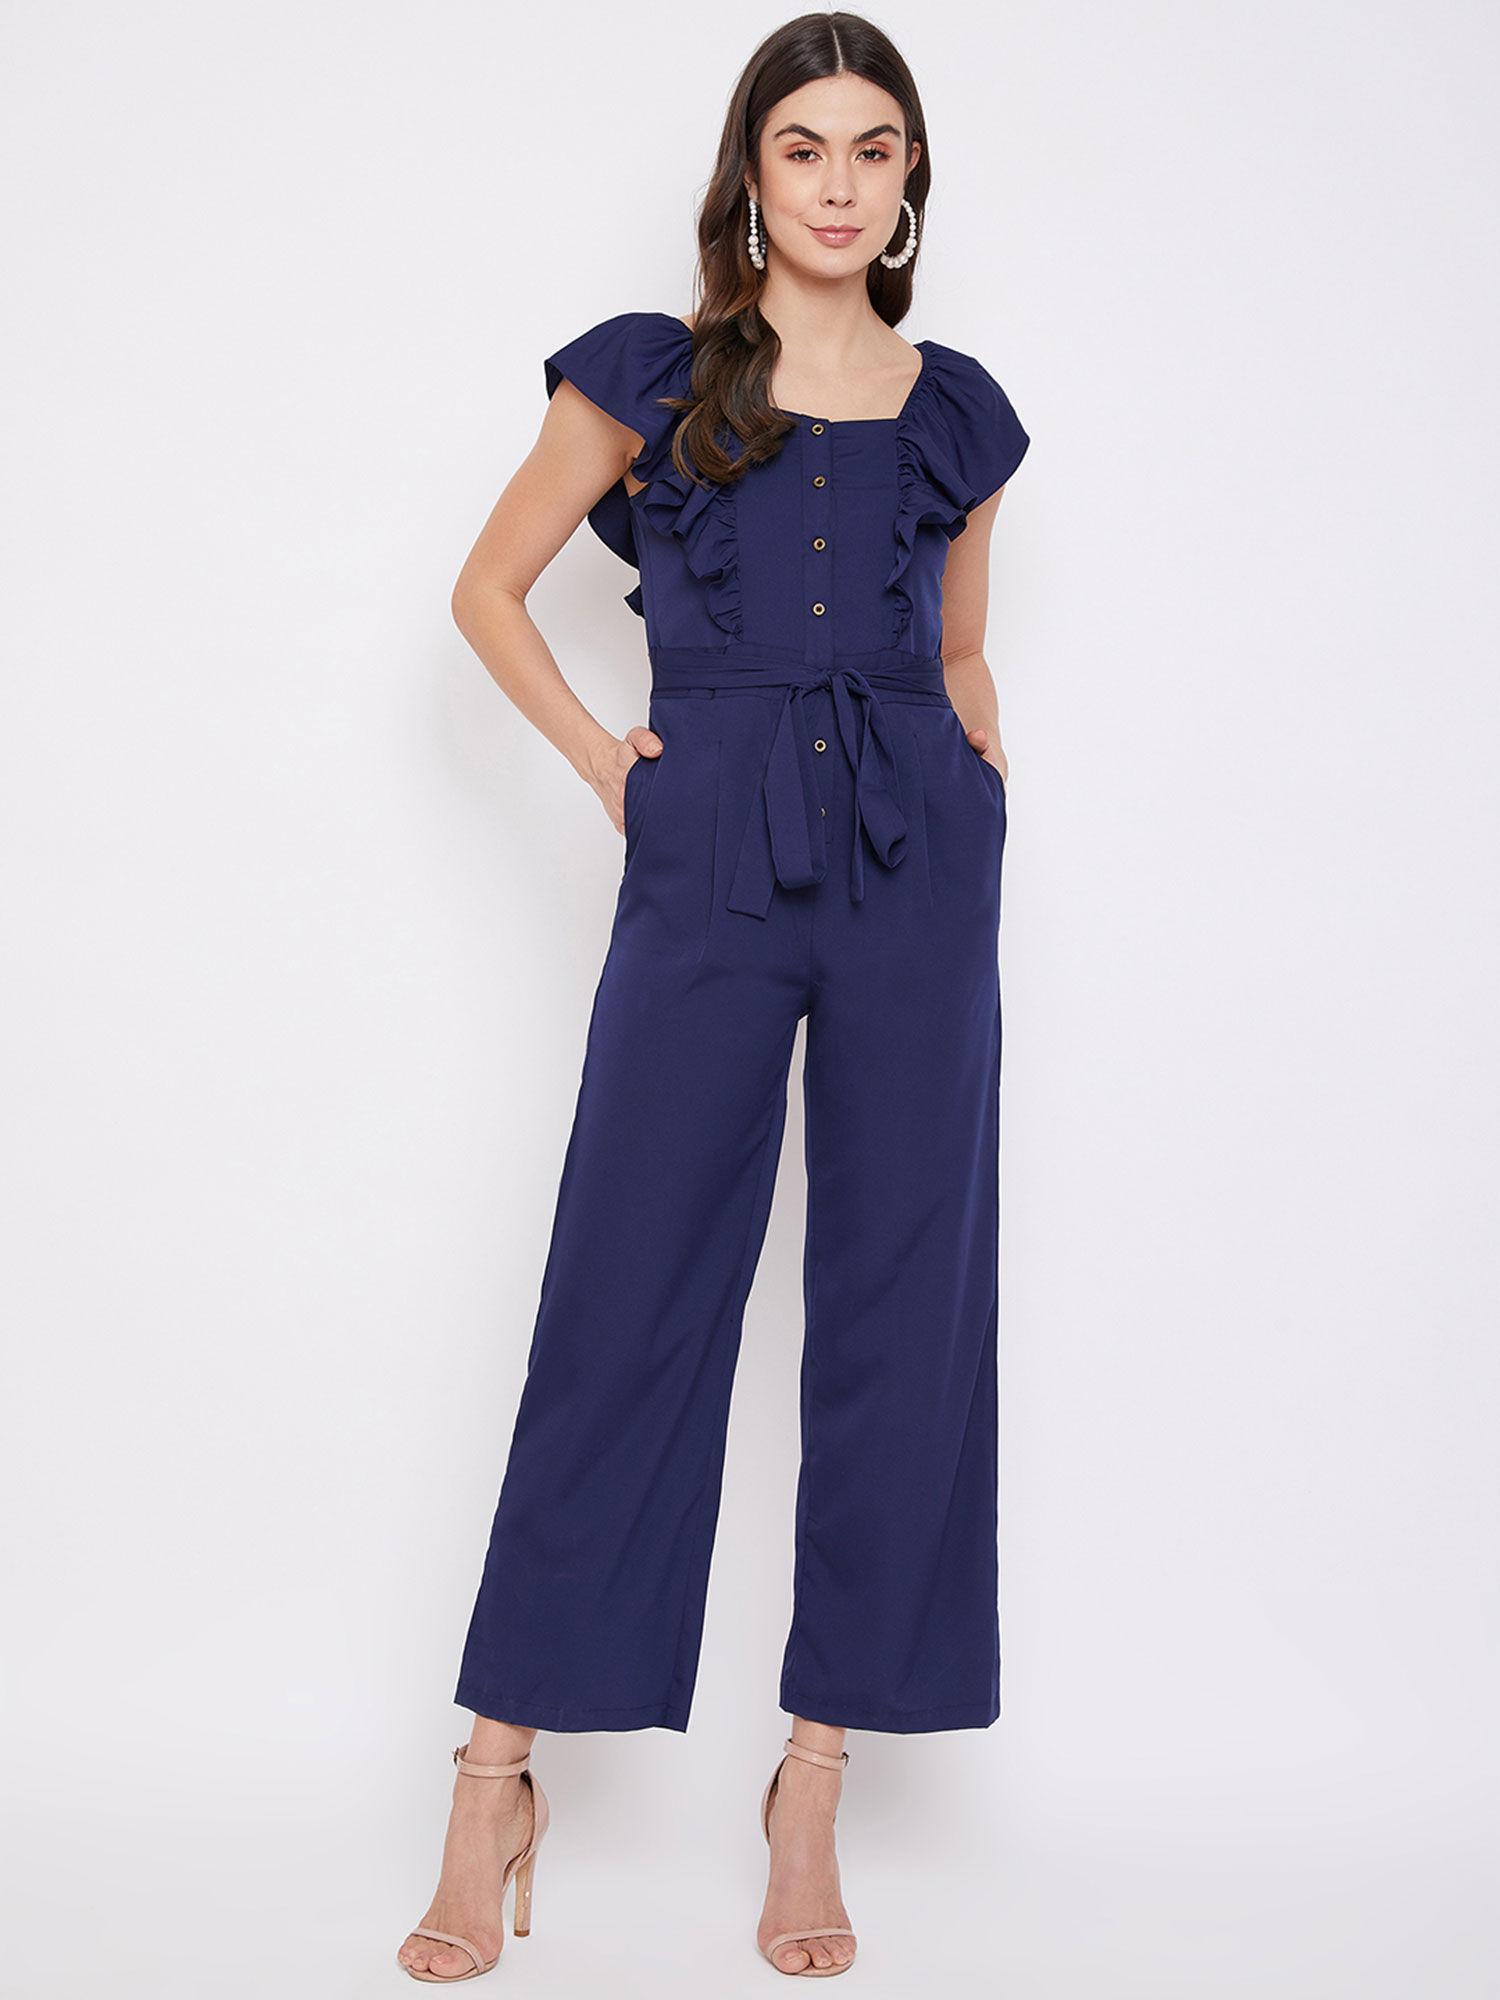 Women Crepe Printed Relaxed Fit Full Length Ruffle Jumpsuit Navy Blue